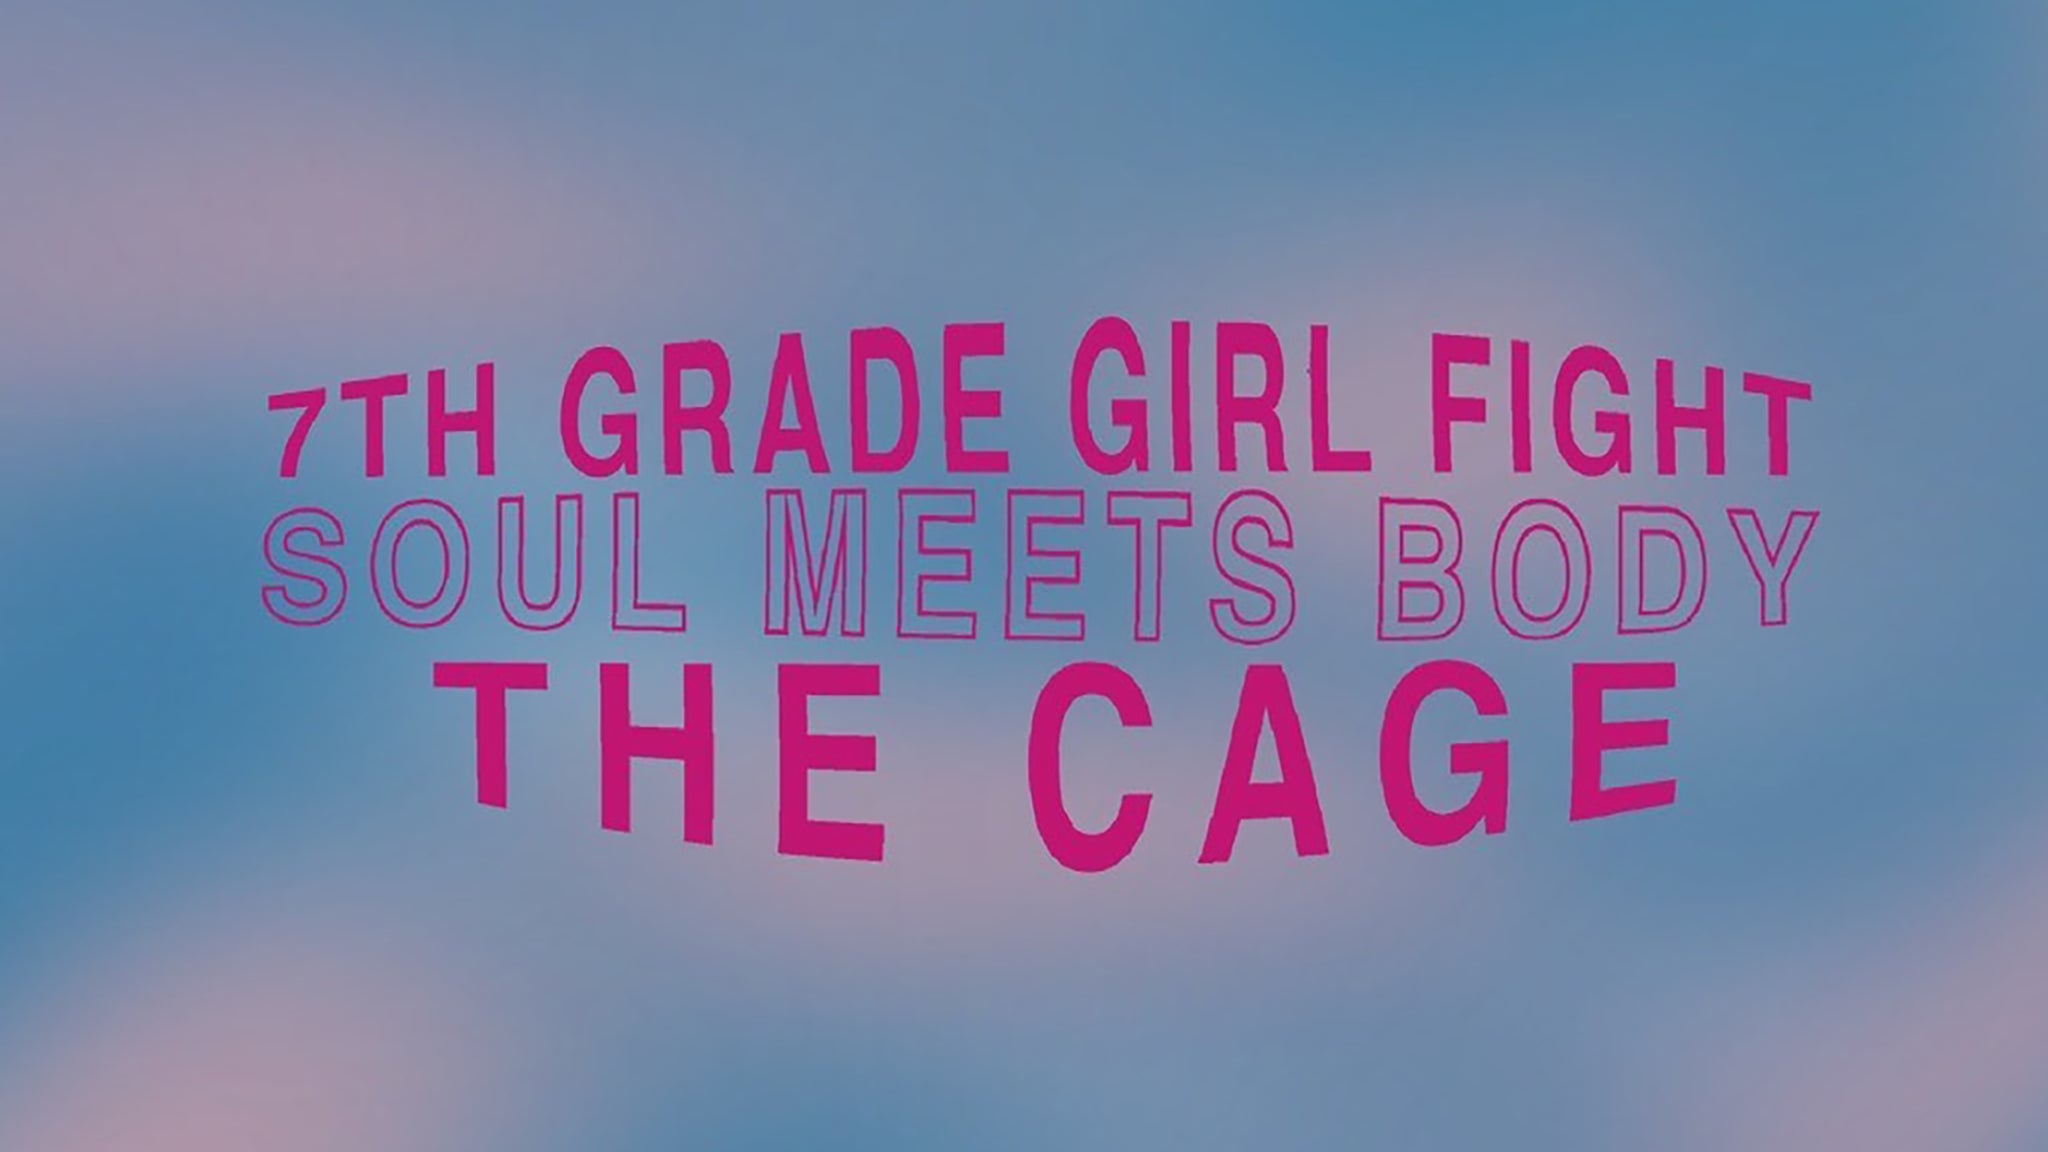 7th Grade Girl Fight with Soul Meets Body and The Cage